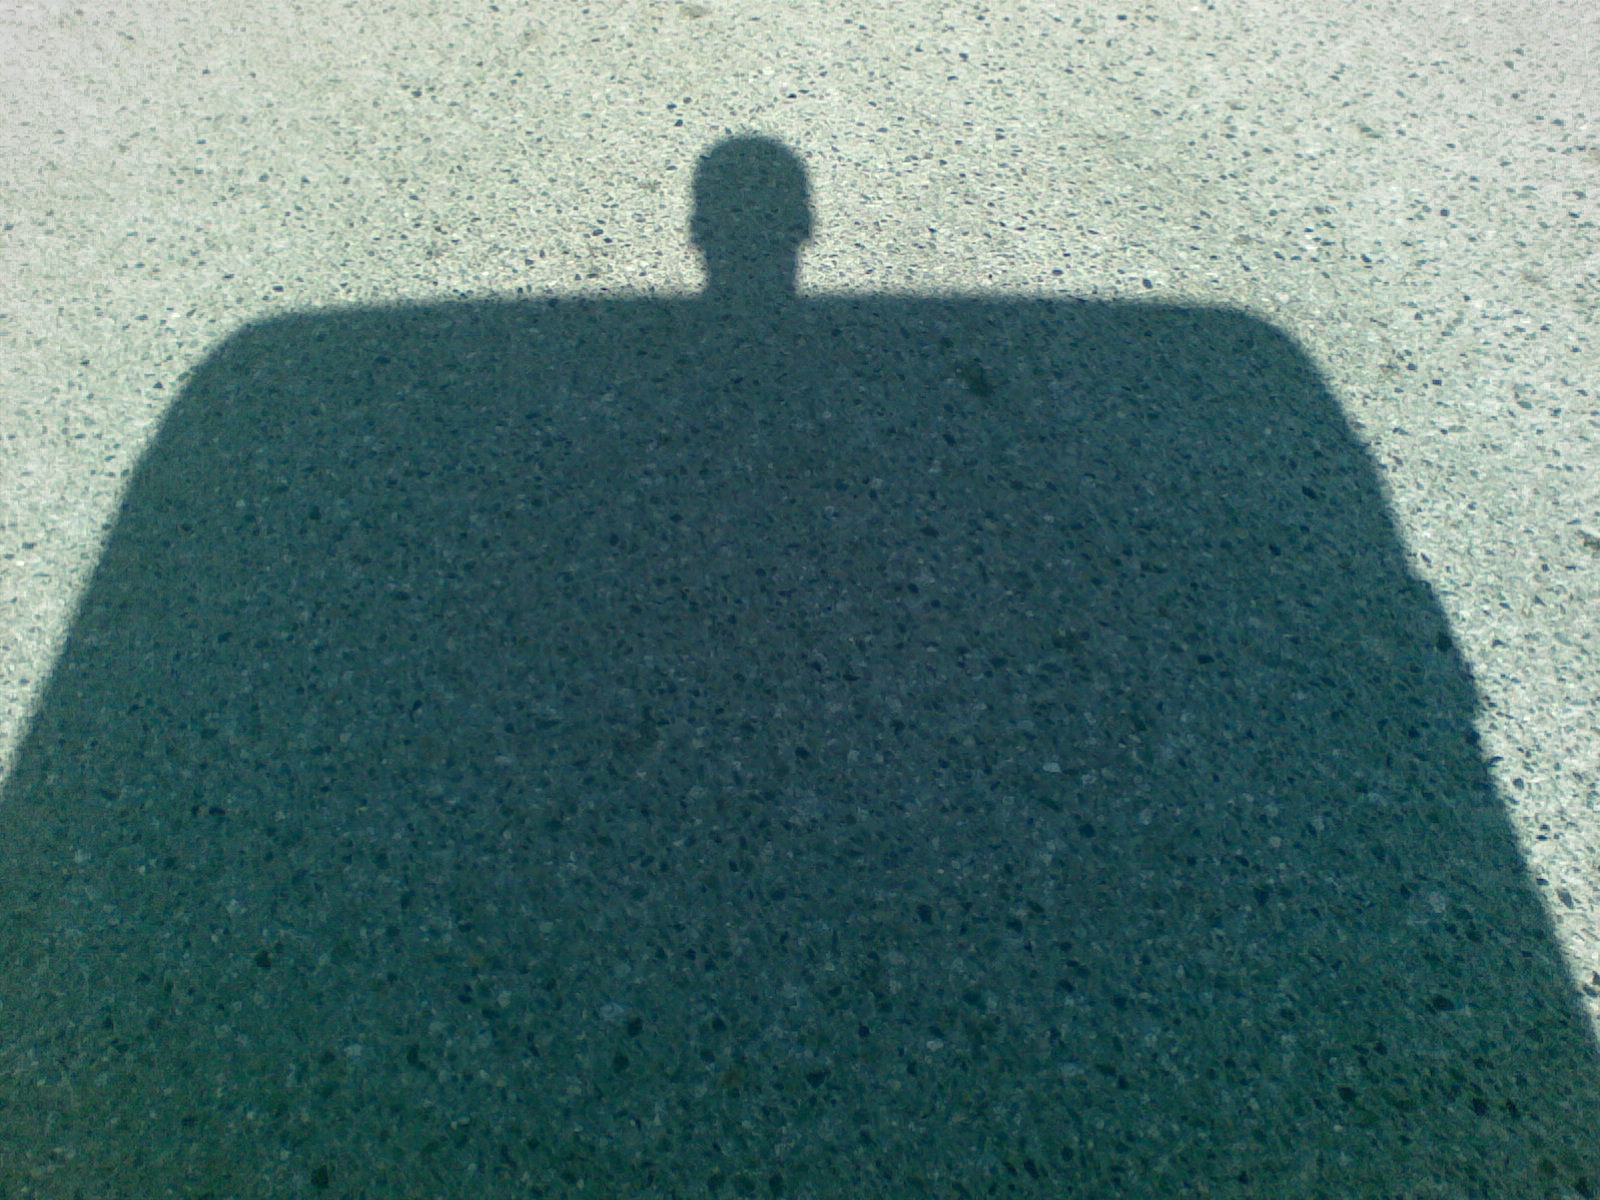 a shadow of a man walking across the street with a camera flash in the background